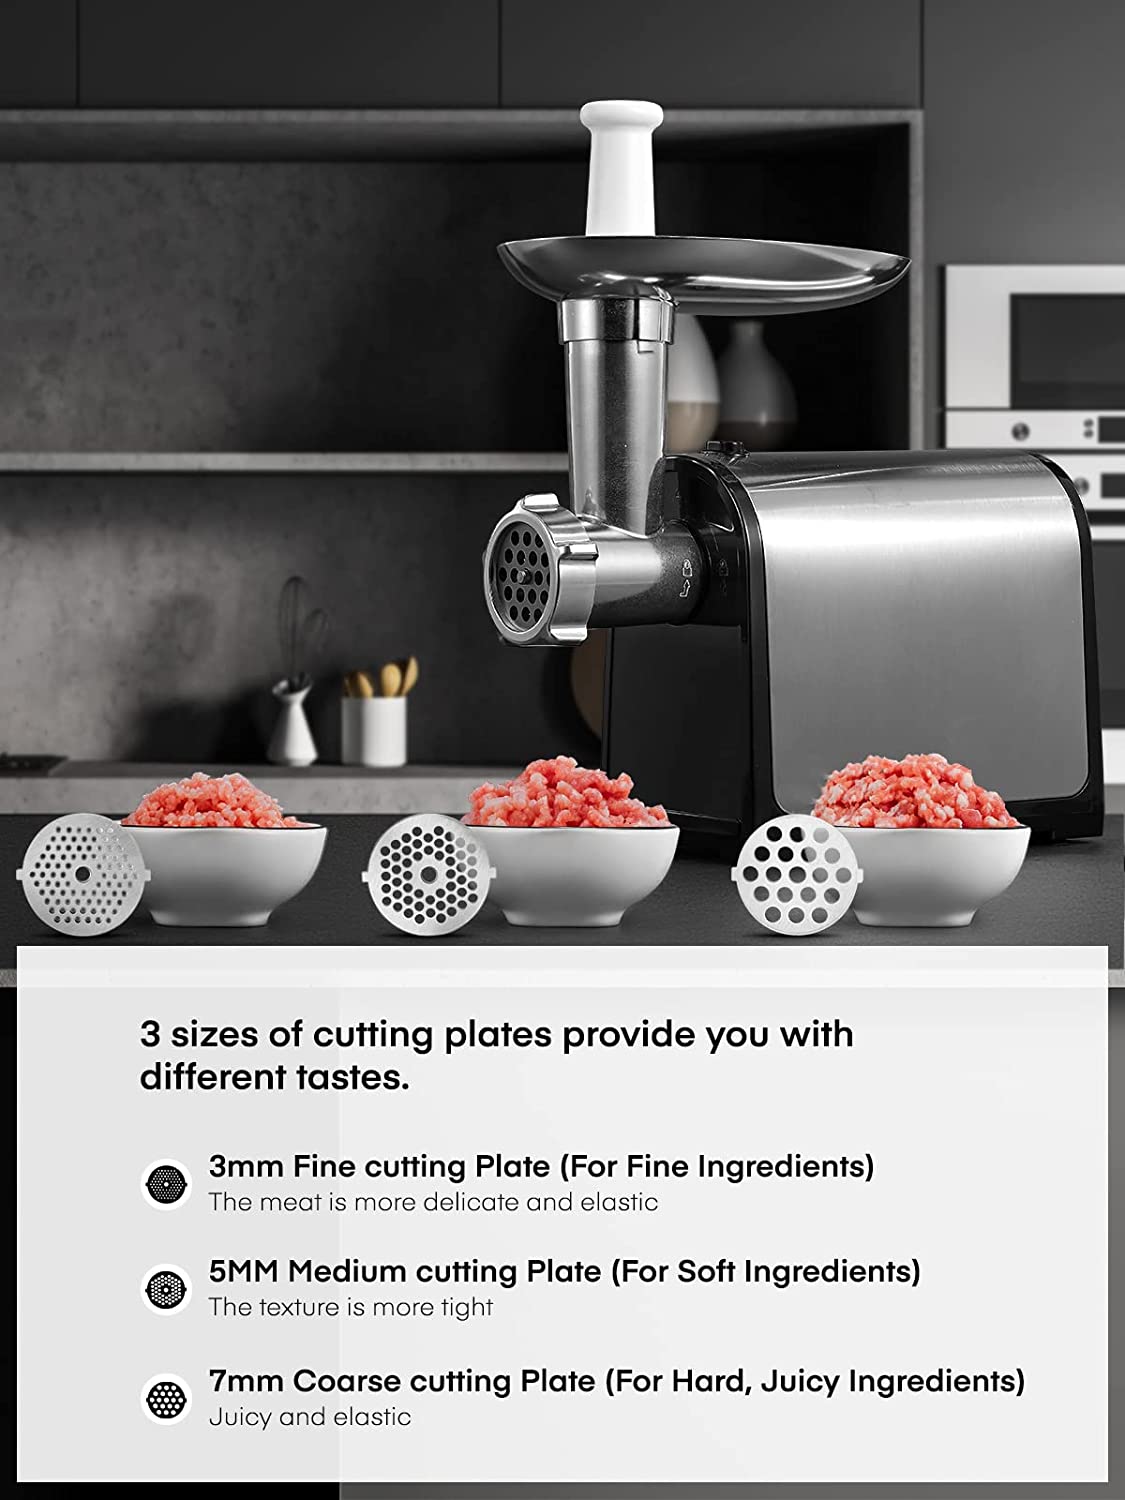 Heavy Duty Electric Meat Grinder, 3000W Max, 5 in 1 Sausage Stuffer, 3  Stainless Steel Grinding Plates, 5 Pounds/Min 